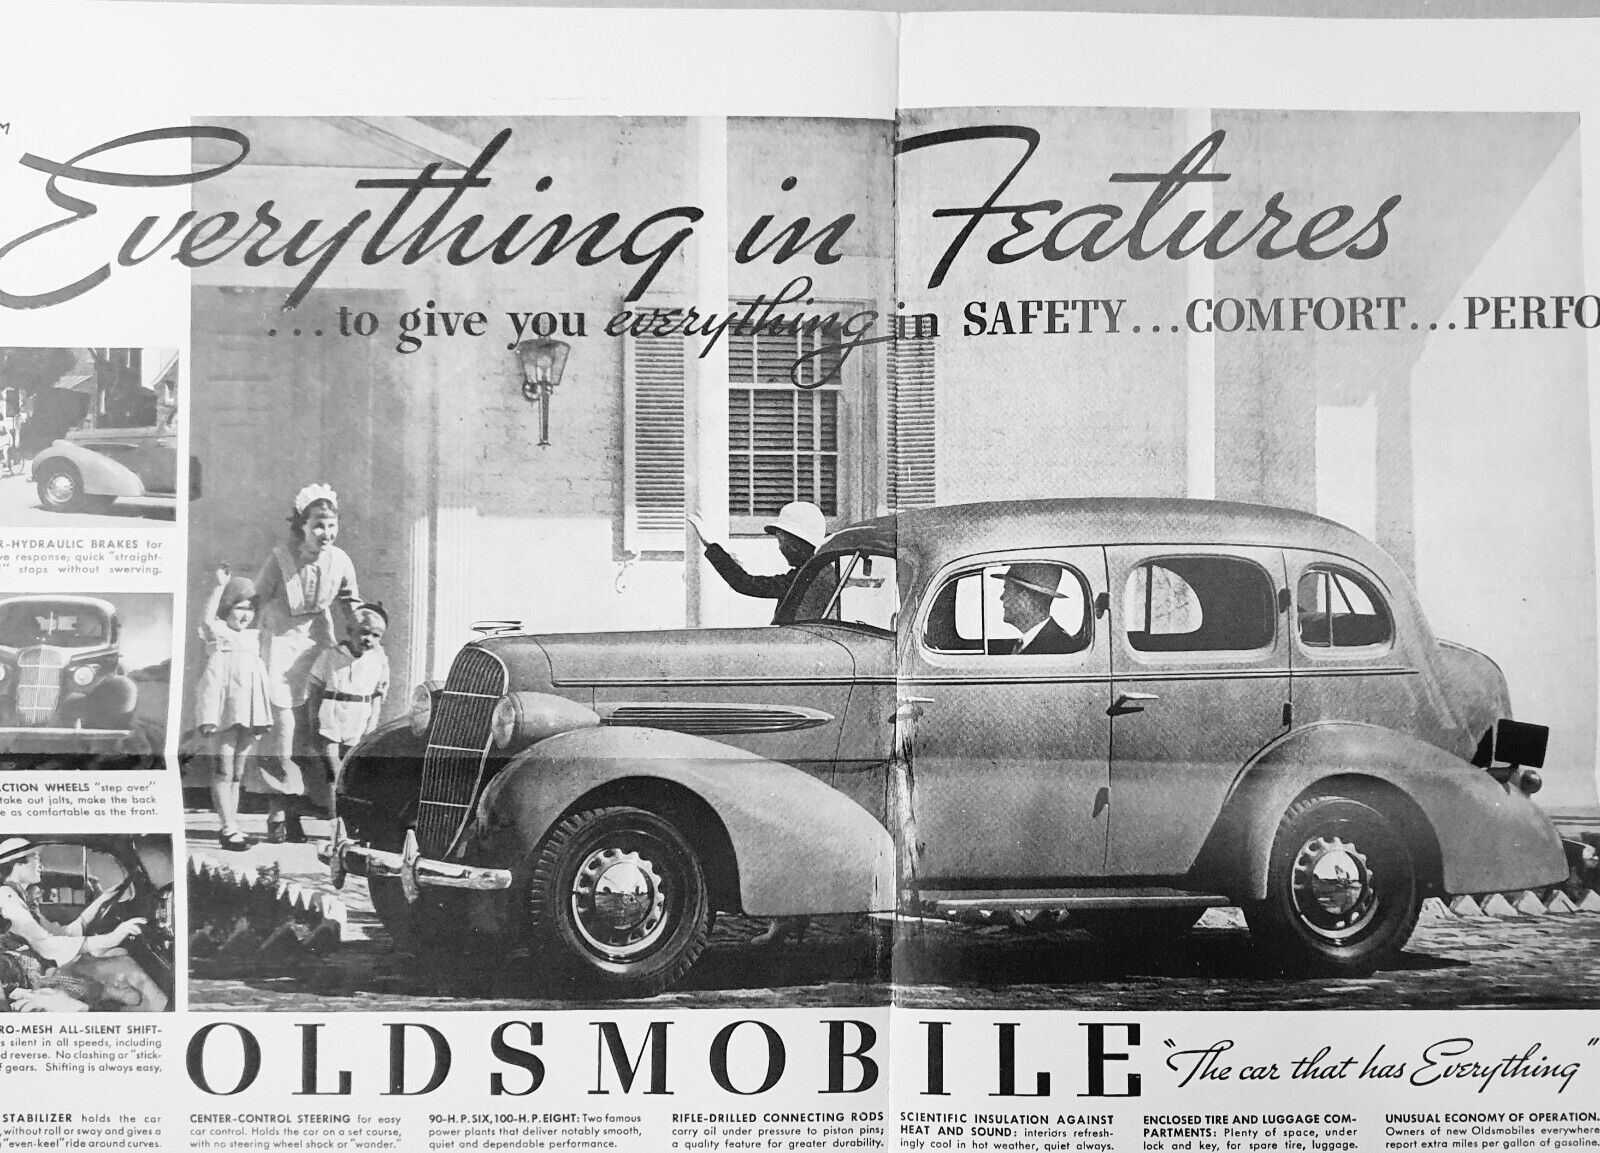 1937 Oldsmobile F-37 Full-Page Newspaper Ad 22in x 17in Draft Version Rare NOS